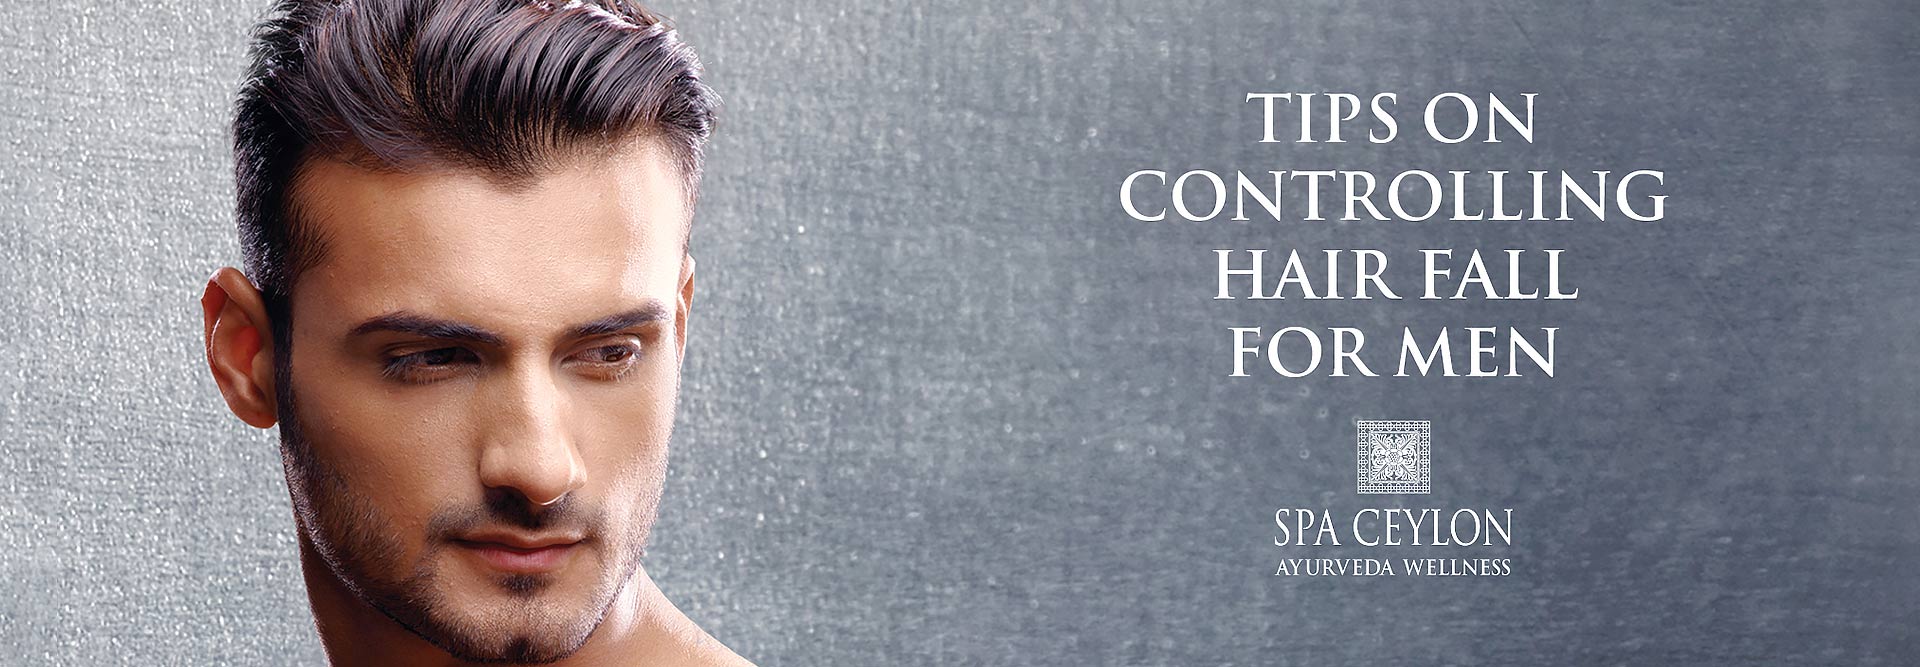 Tips on Controlling Hair Fall for Men | Spa Ceylon